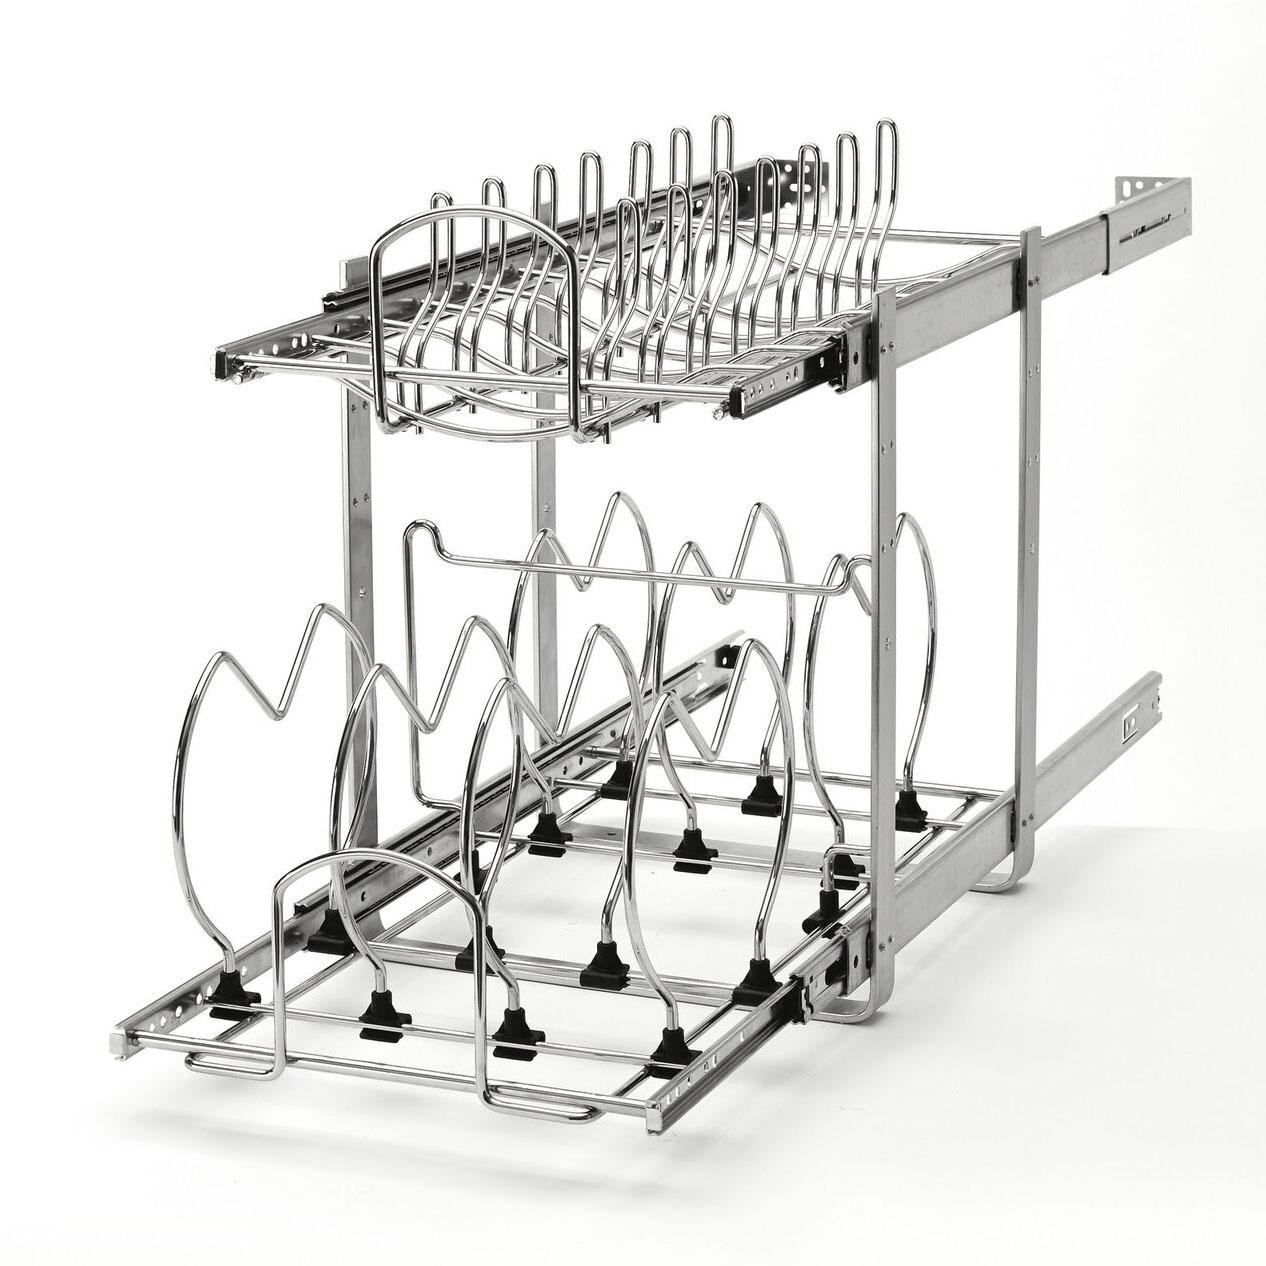 Rev-A-Shelf Pots and Pans Cookware Cabinet Organizer for $59.99 Shipped